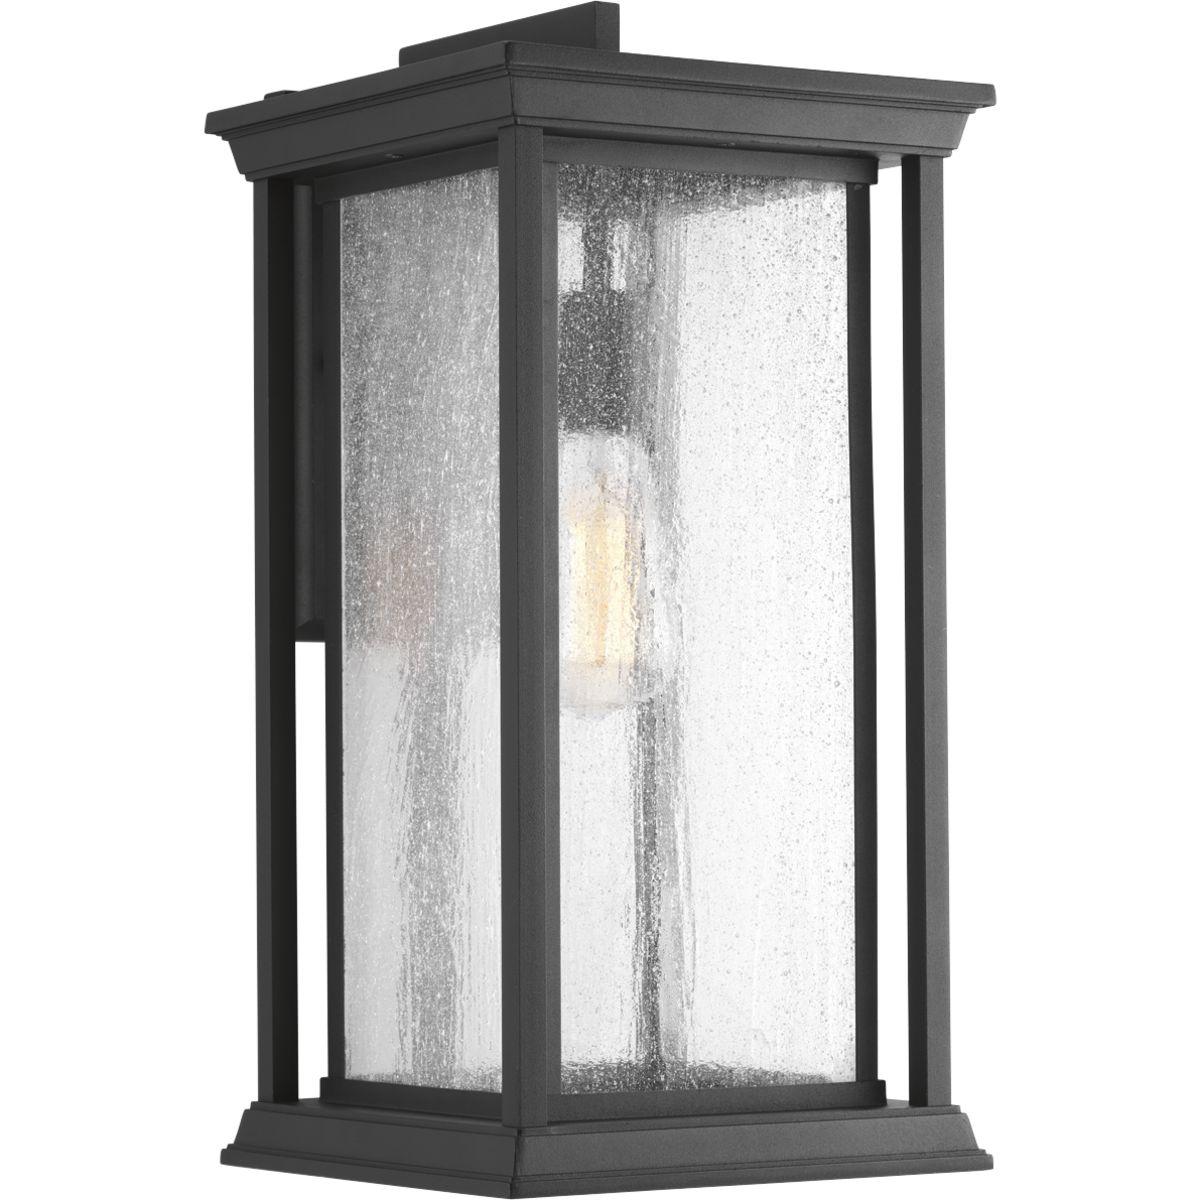 Hubbell P5613-31 One-Light extra-large wall lantern with a Craftsman-inspired silhouette, Endicott offers visual interest to your home's exterior. The elongated frame is finished with clear seeded glass.  ; Features a Craftsman-inspired silhouette ; An outdoor lantern wit